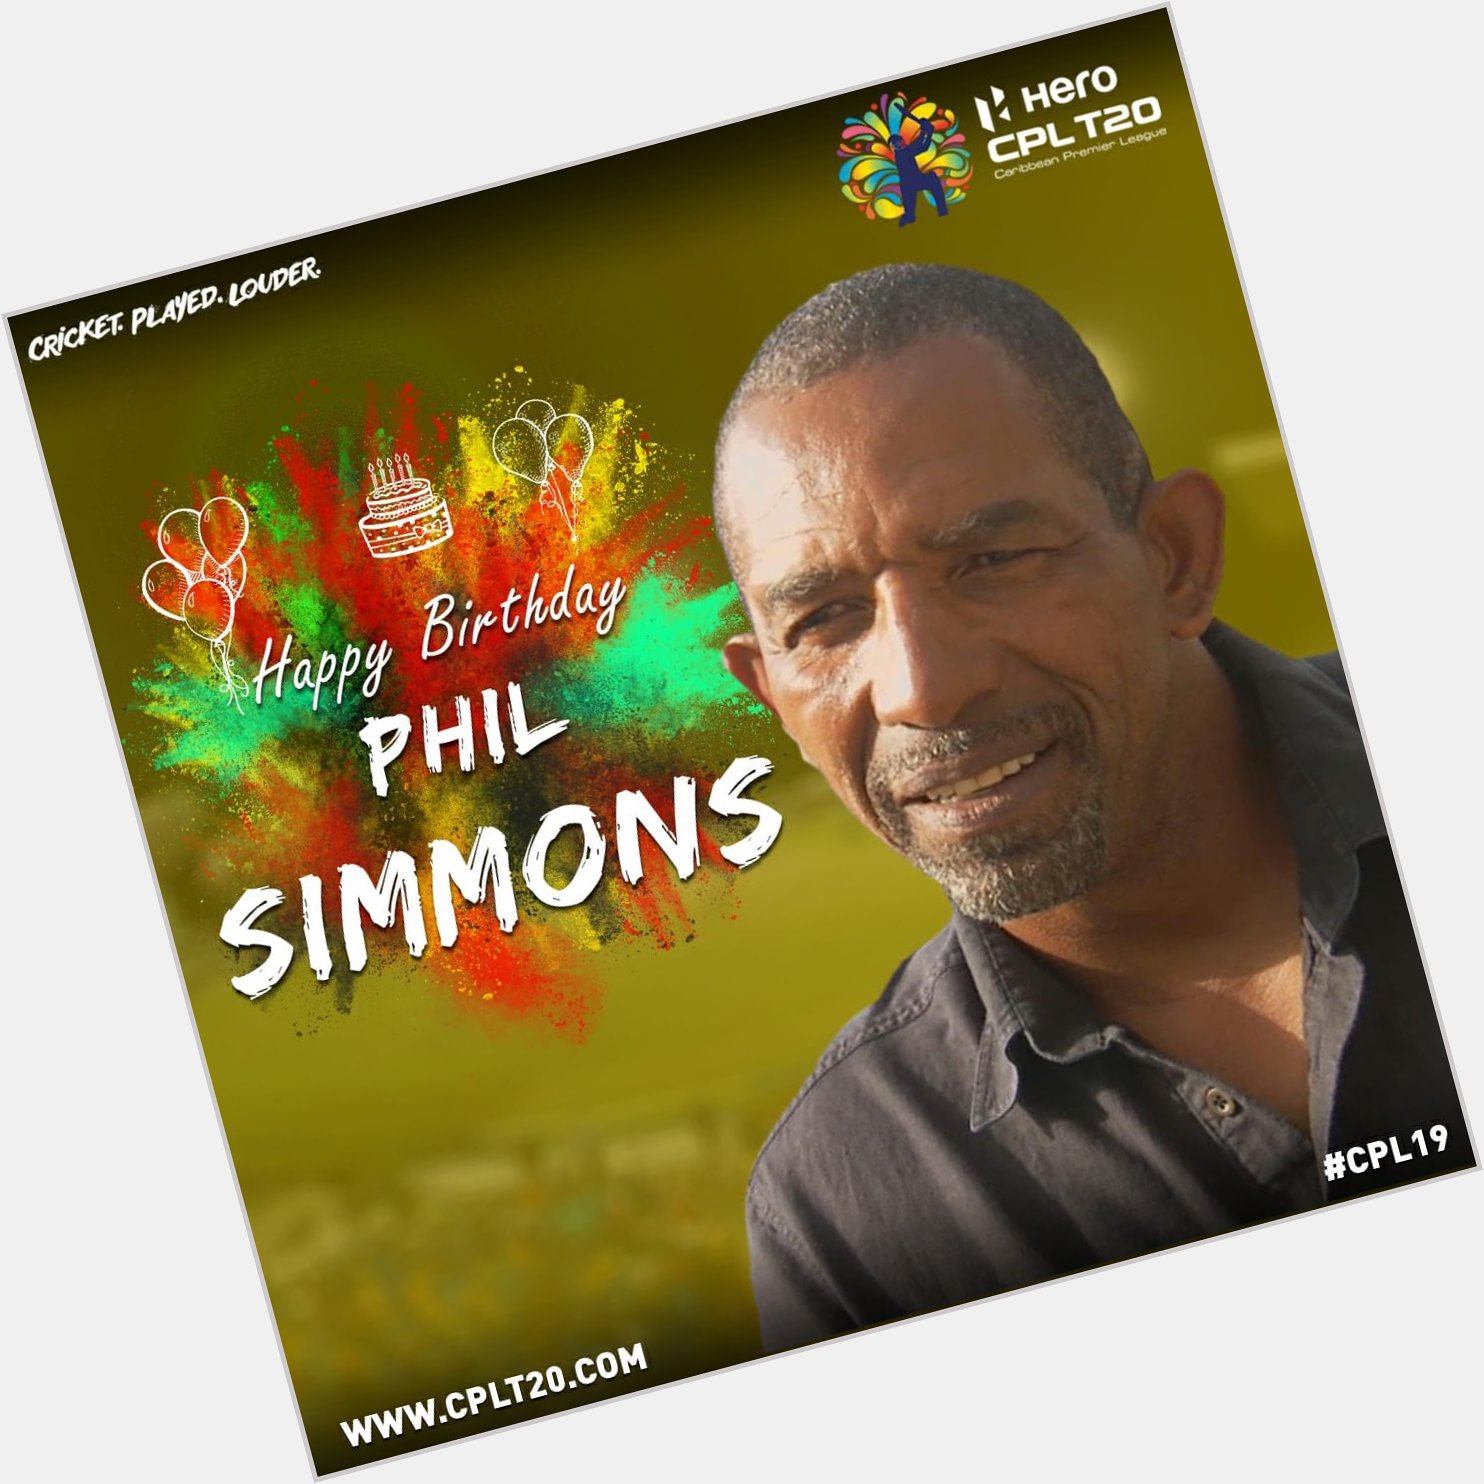 Happy Birthday to the one and only Phil Simmons!!!   